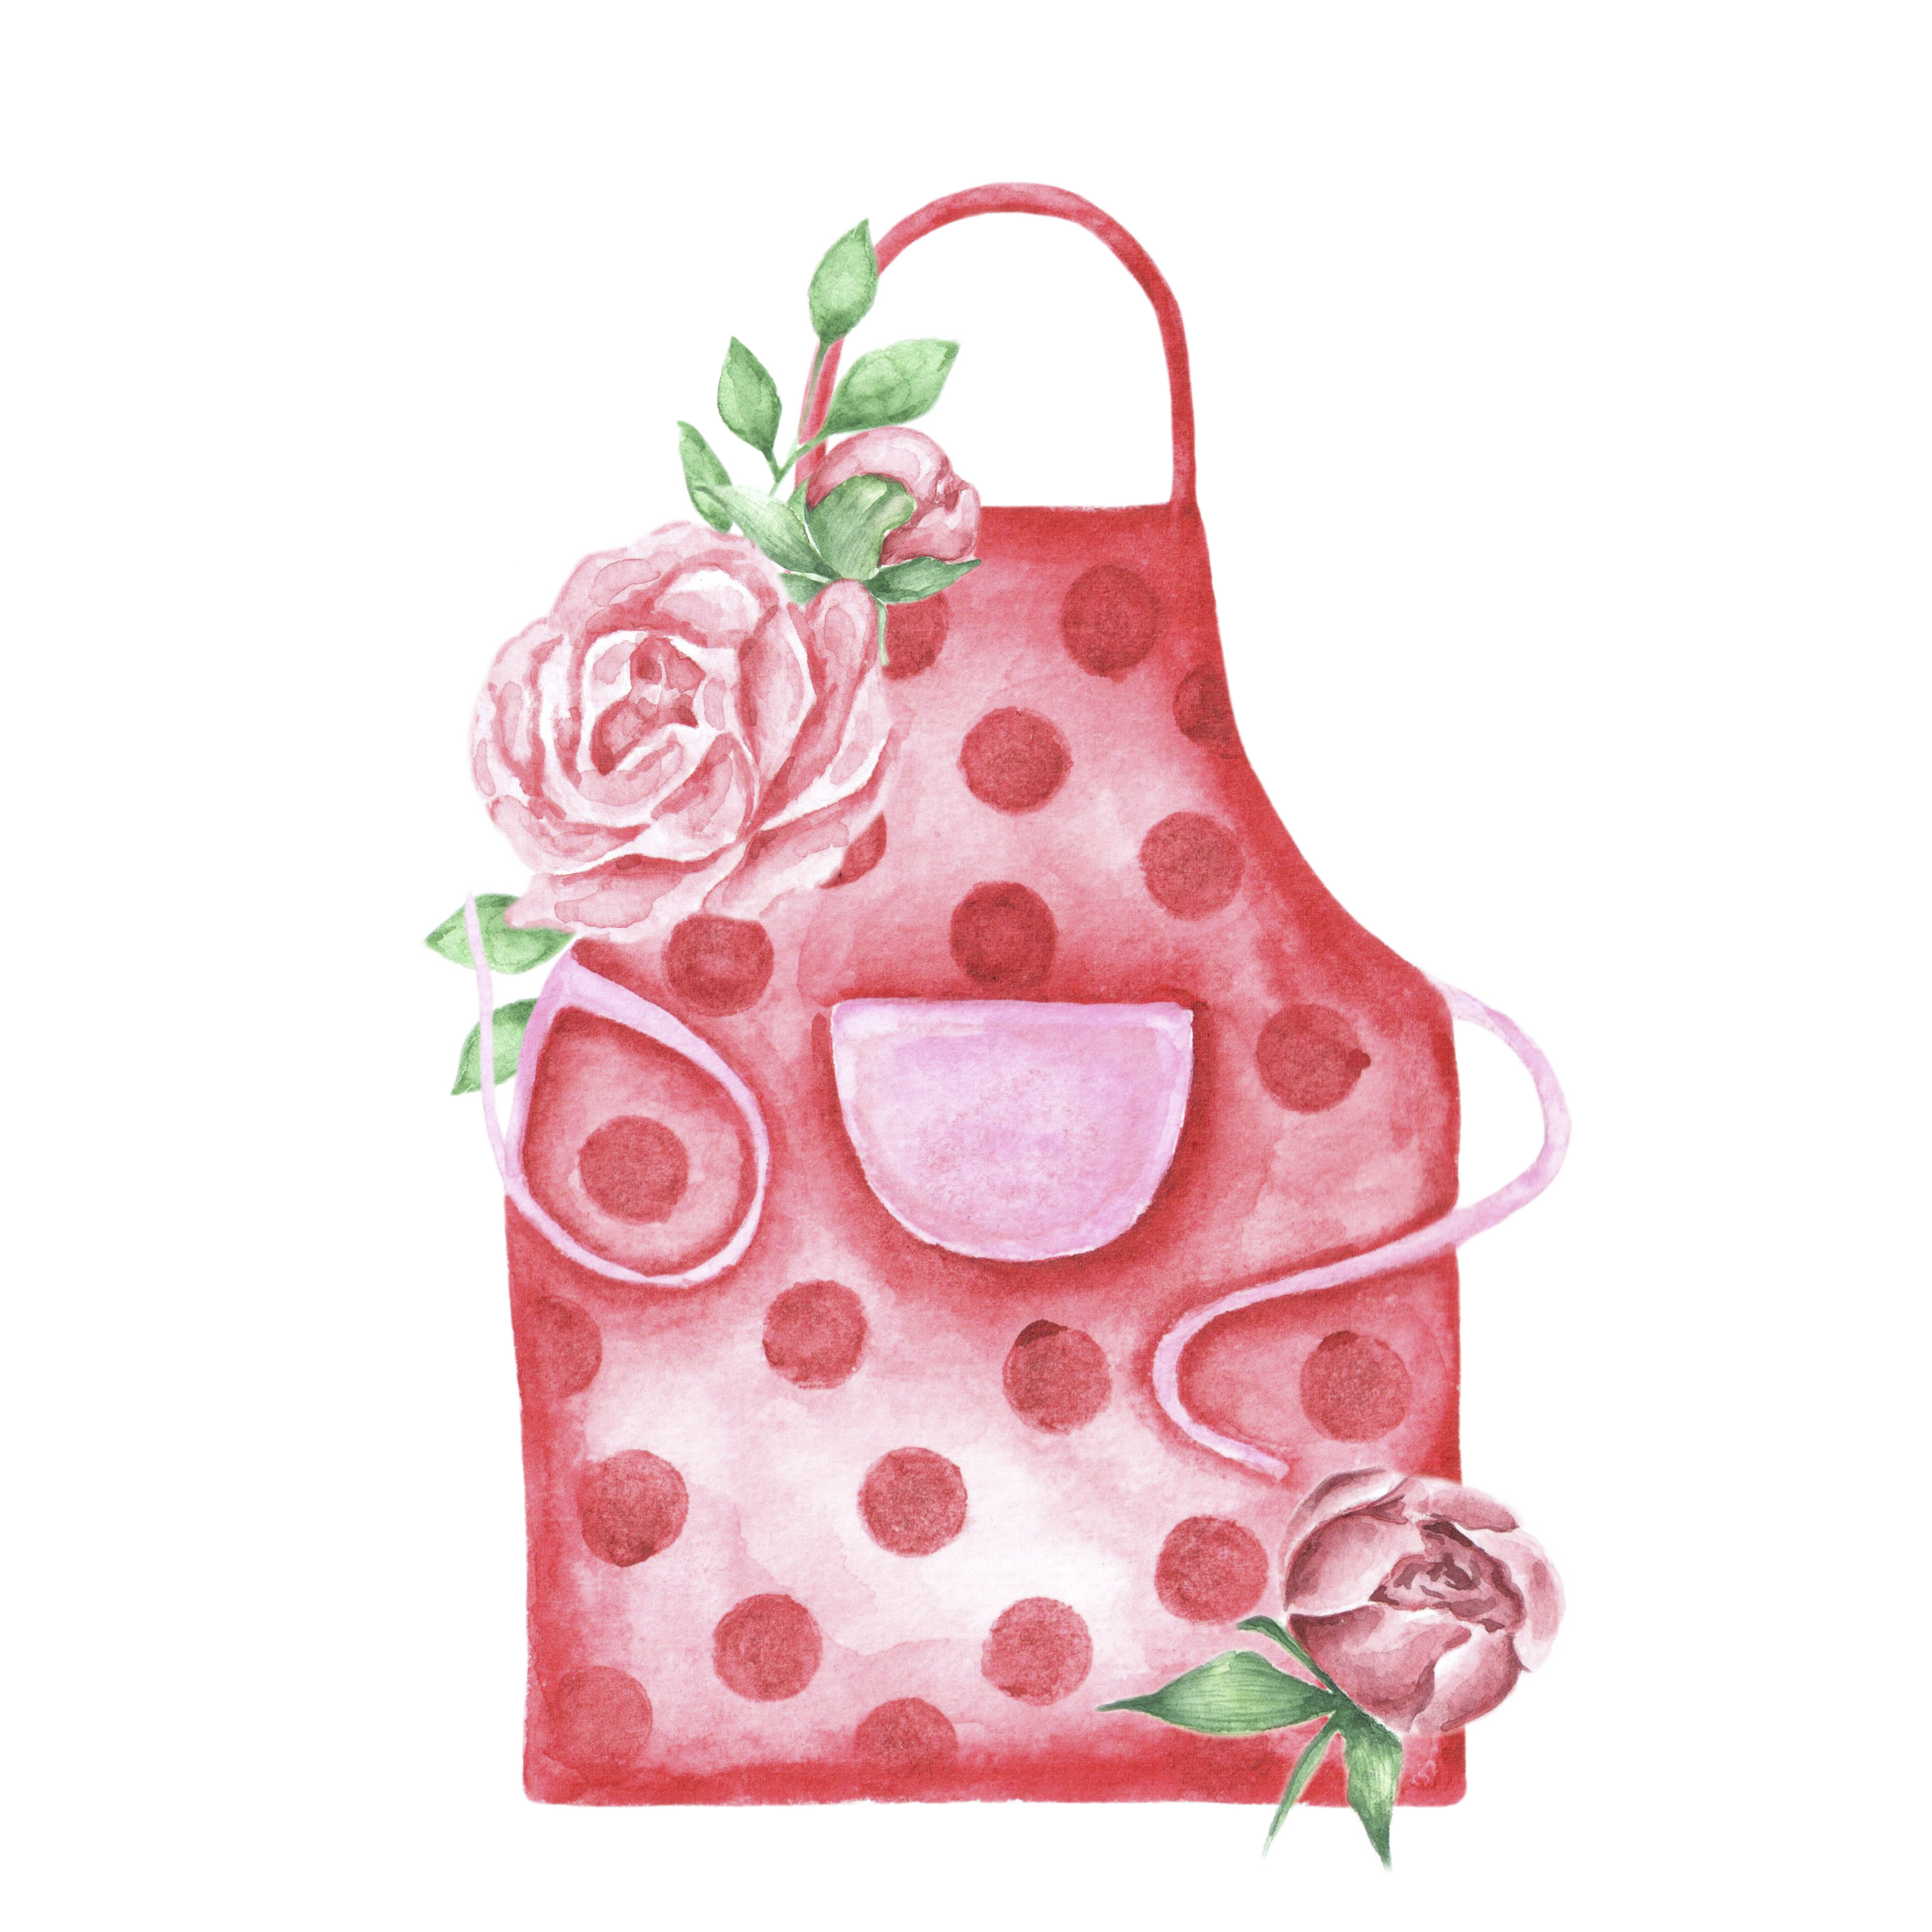 https://media1.thehungryjpeg.com/thumbs2/ori_3922951_woslh6gz3xizekc5d8bz8w67fwk6hxmyg5pozky1_apron-watercolor-illustration-red-apron-with-polka-dots-chef-pastry.png